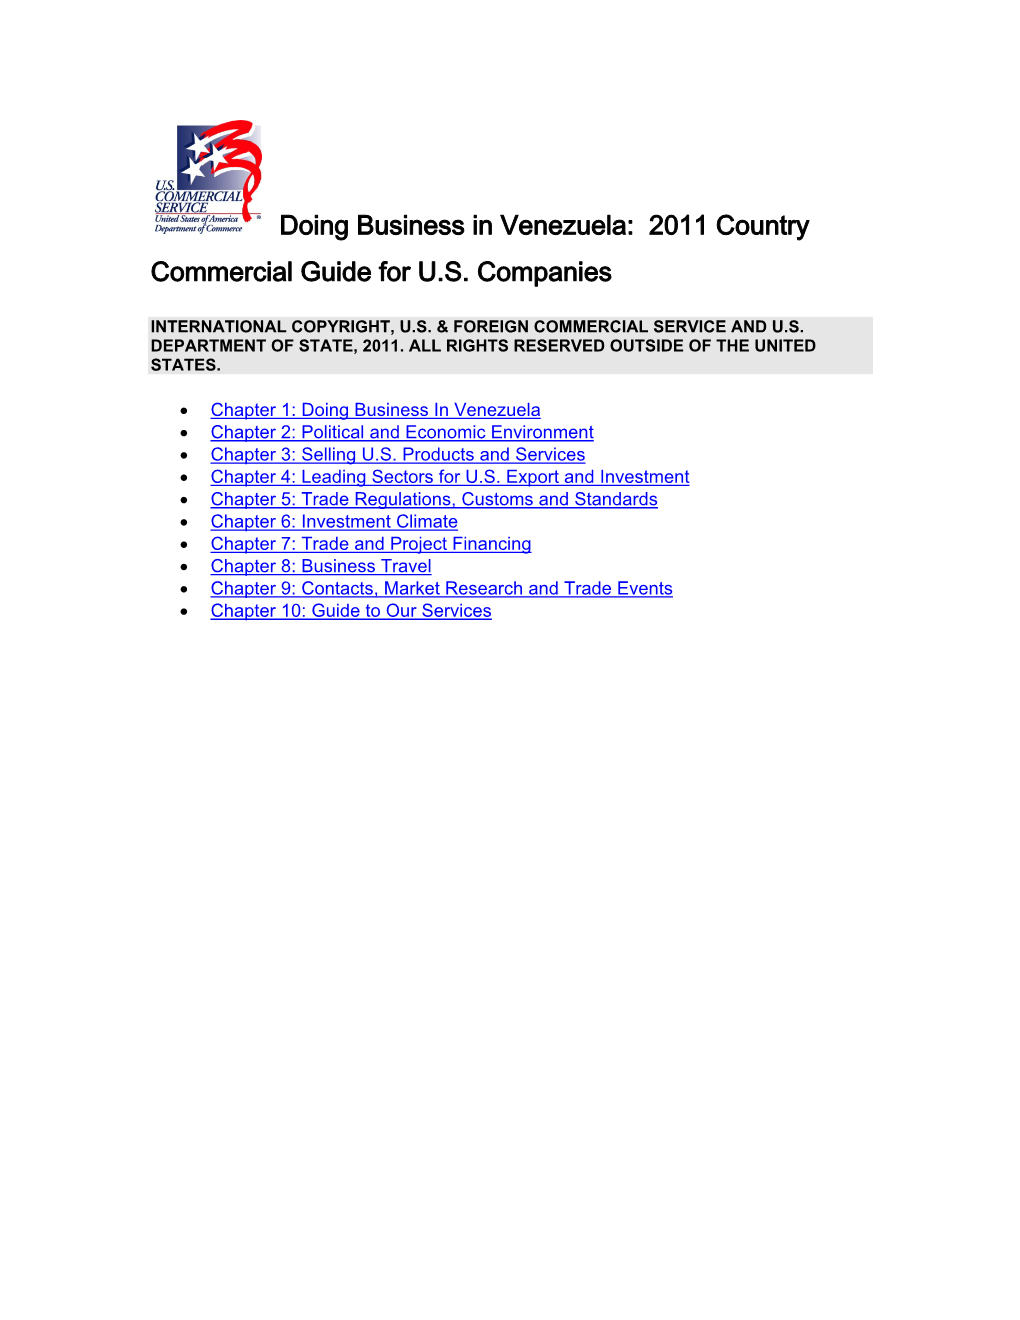 Doing Business in Venezuela: 2011 Country Commercial Guide for U.S